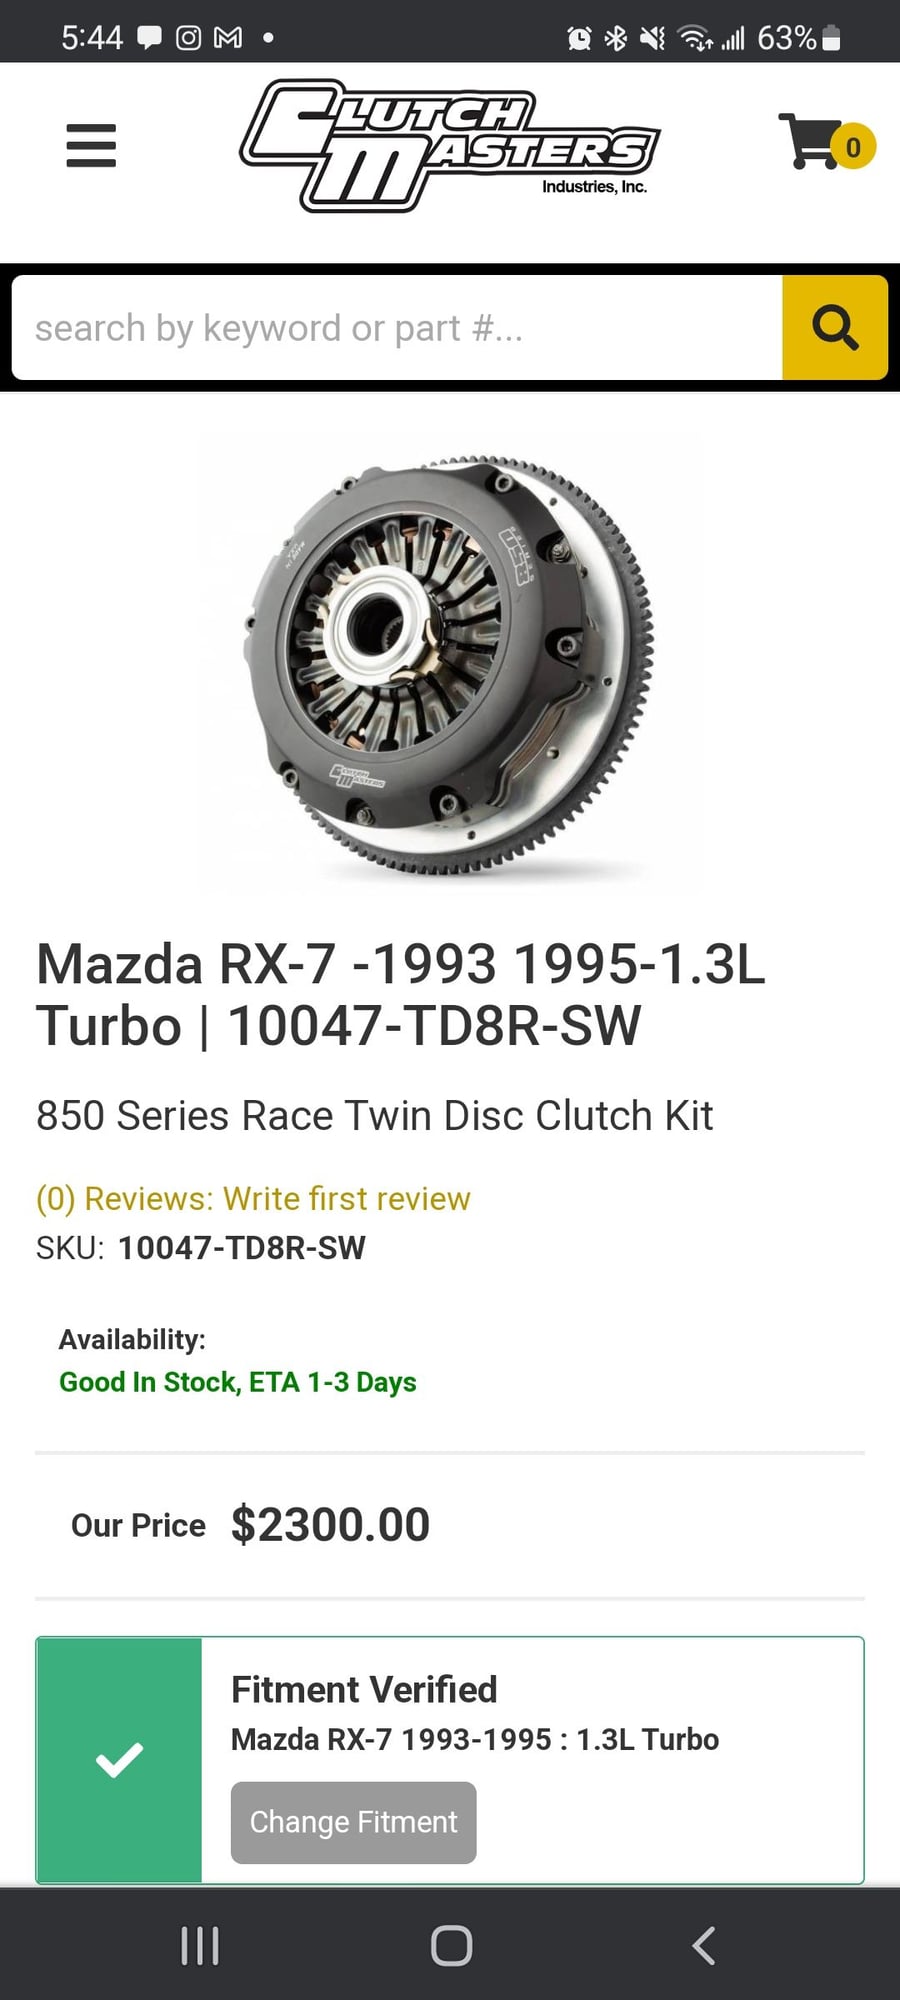 Accessories - Aftermarket parts for sale (Mazdaspeed, Knight sports, Defi, Works Bell, etc) - Used - 1993 to 2002 Mazda RX-7 - Burleson, TX 76028, United States